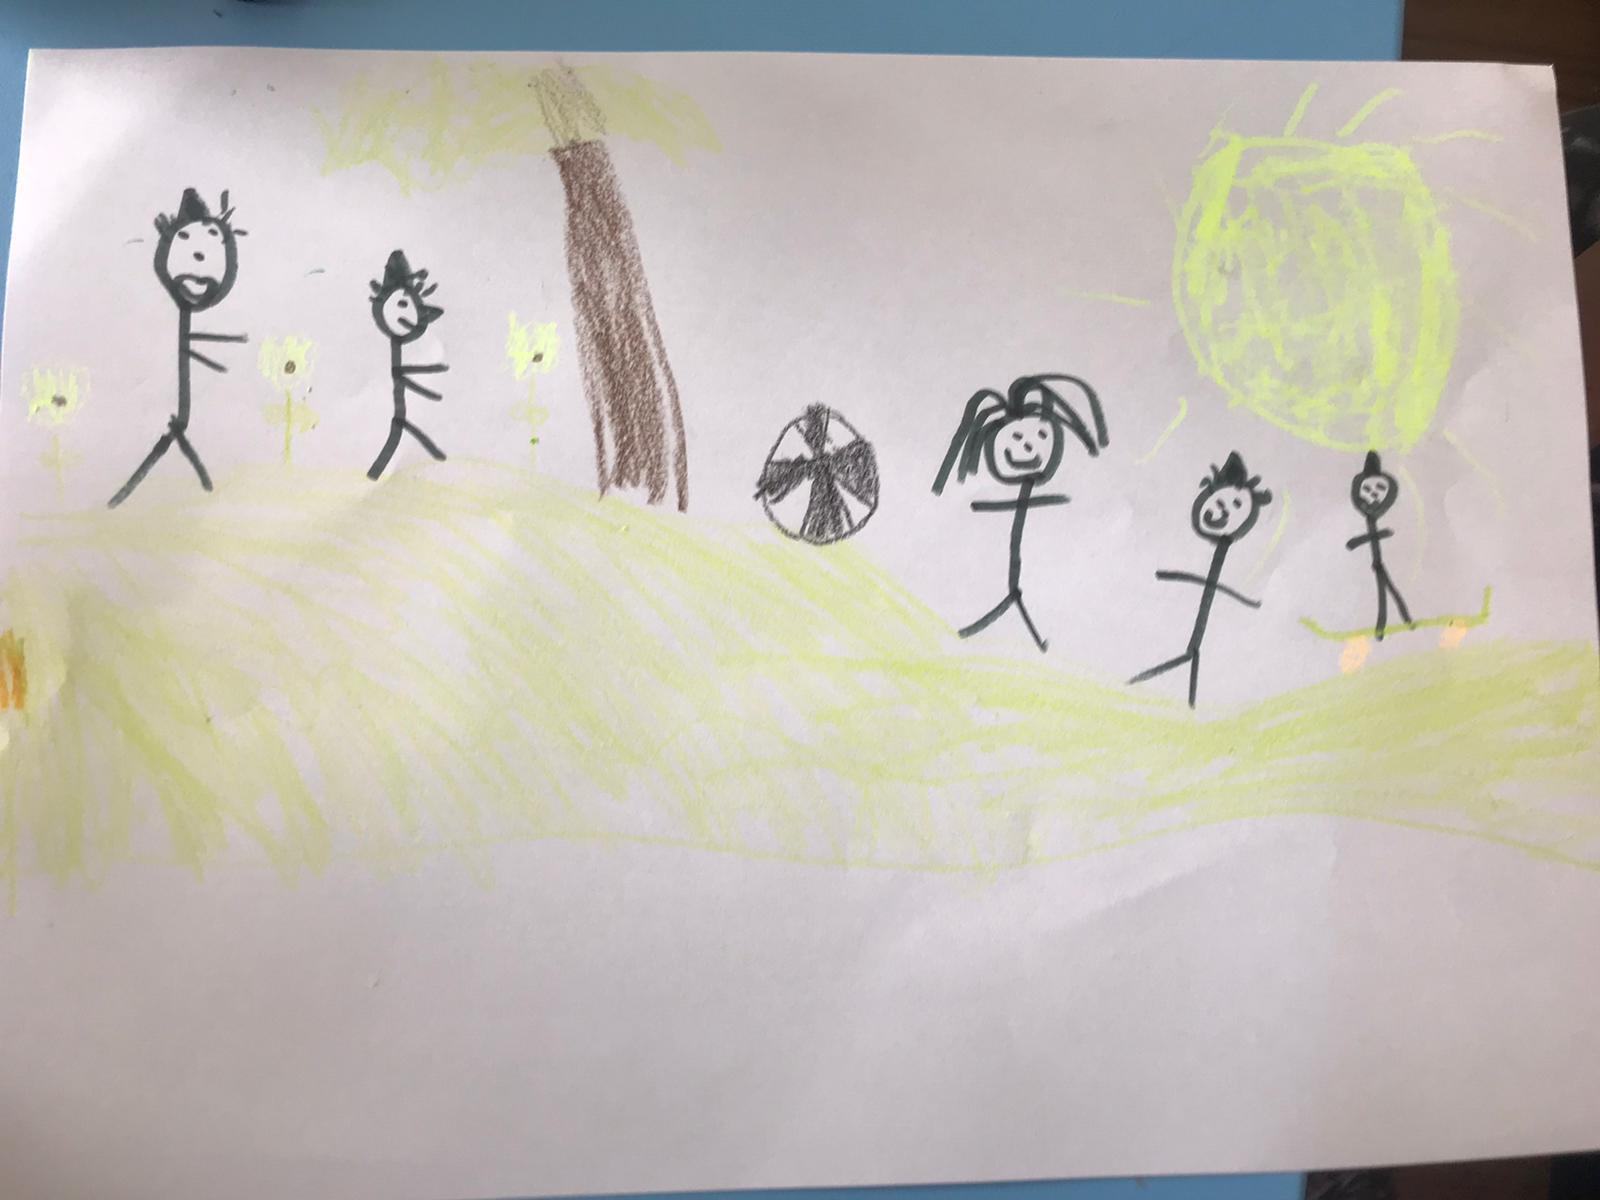 Jack's picture of important things, playing outside with friends